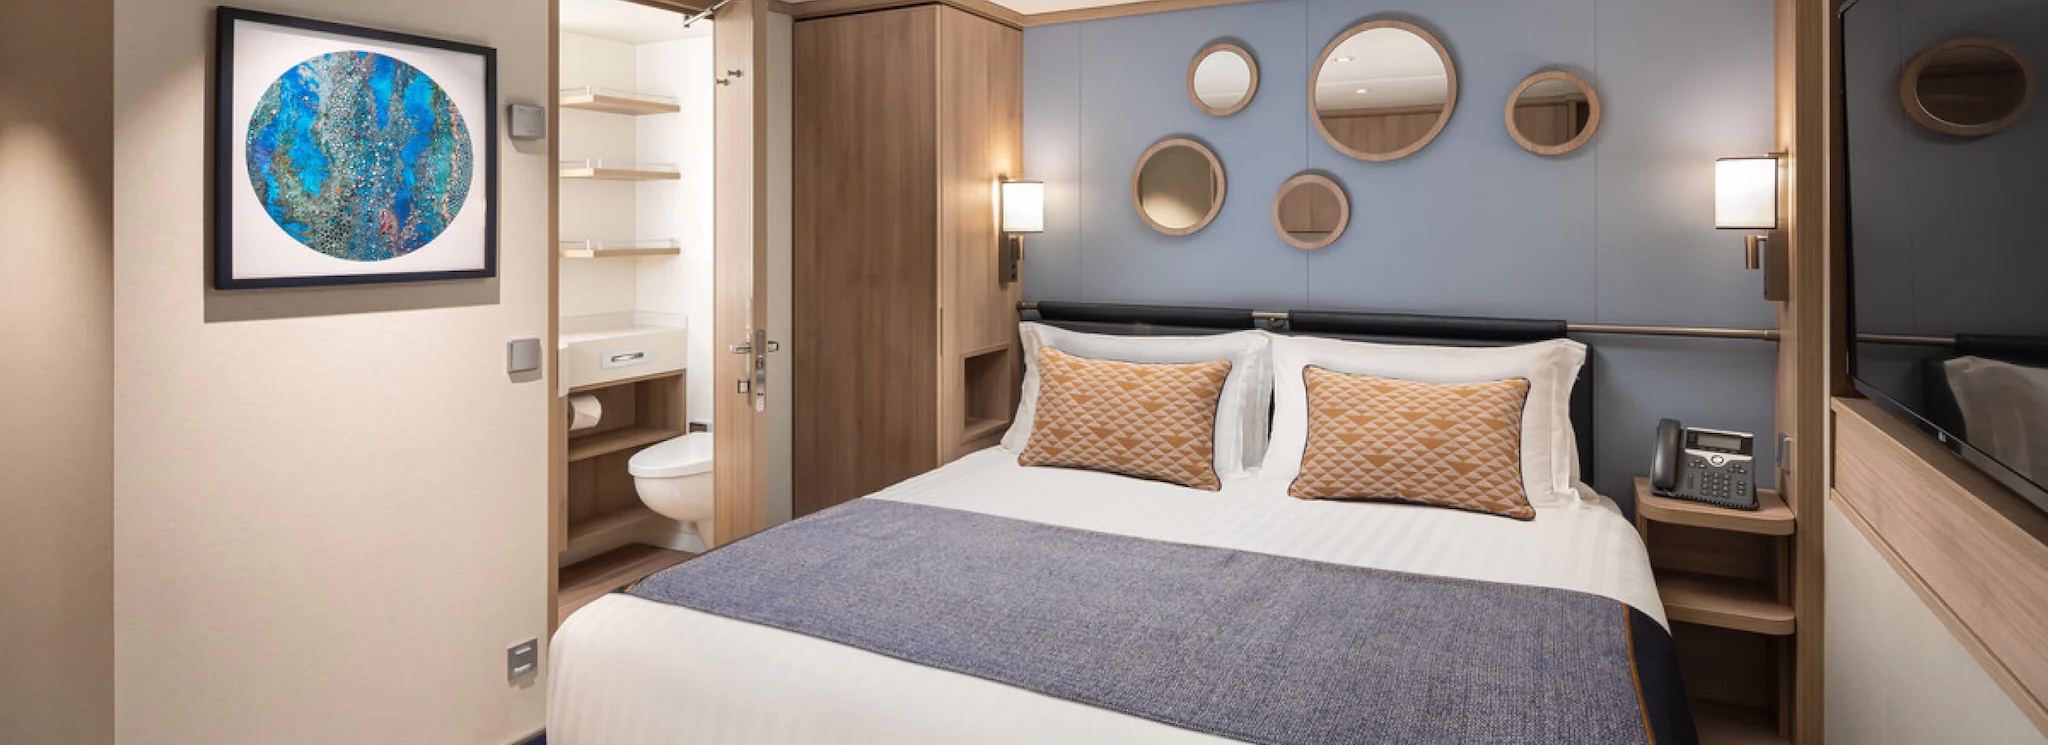 Why Choosing An Inside Cabin On A Cruise Is A Great Idea (Sometimes)